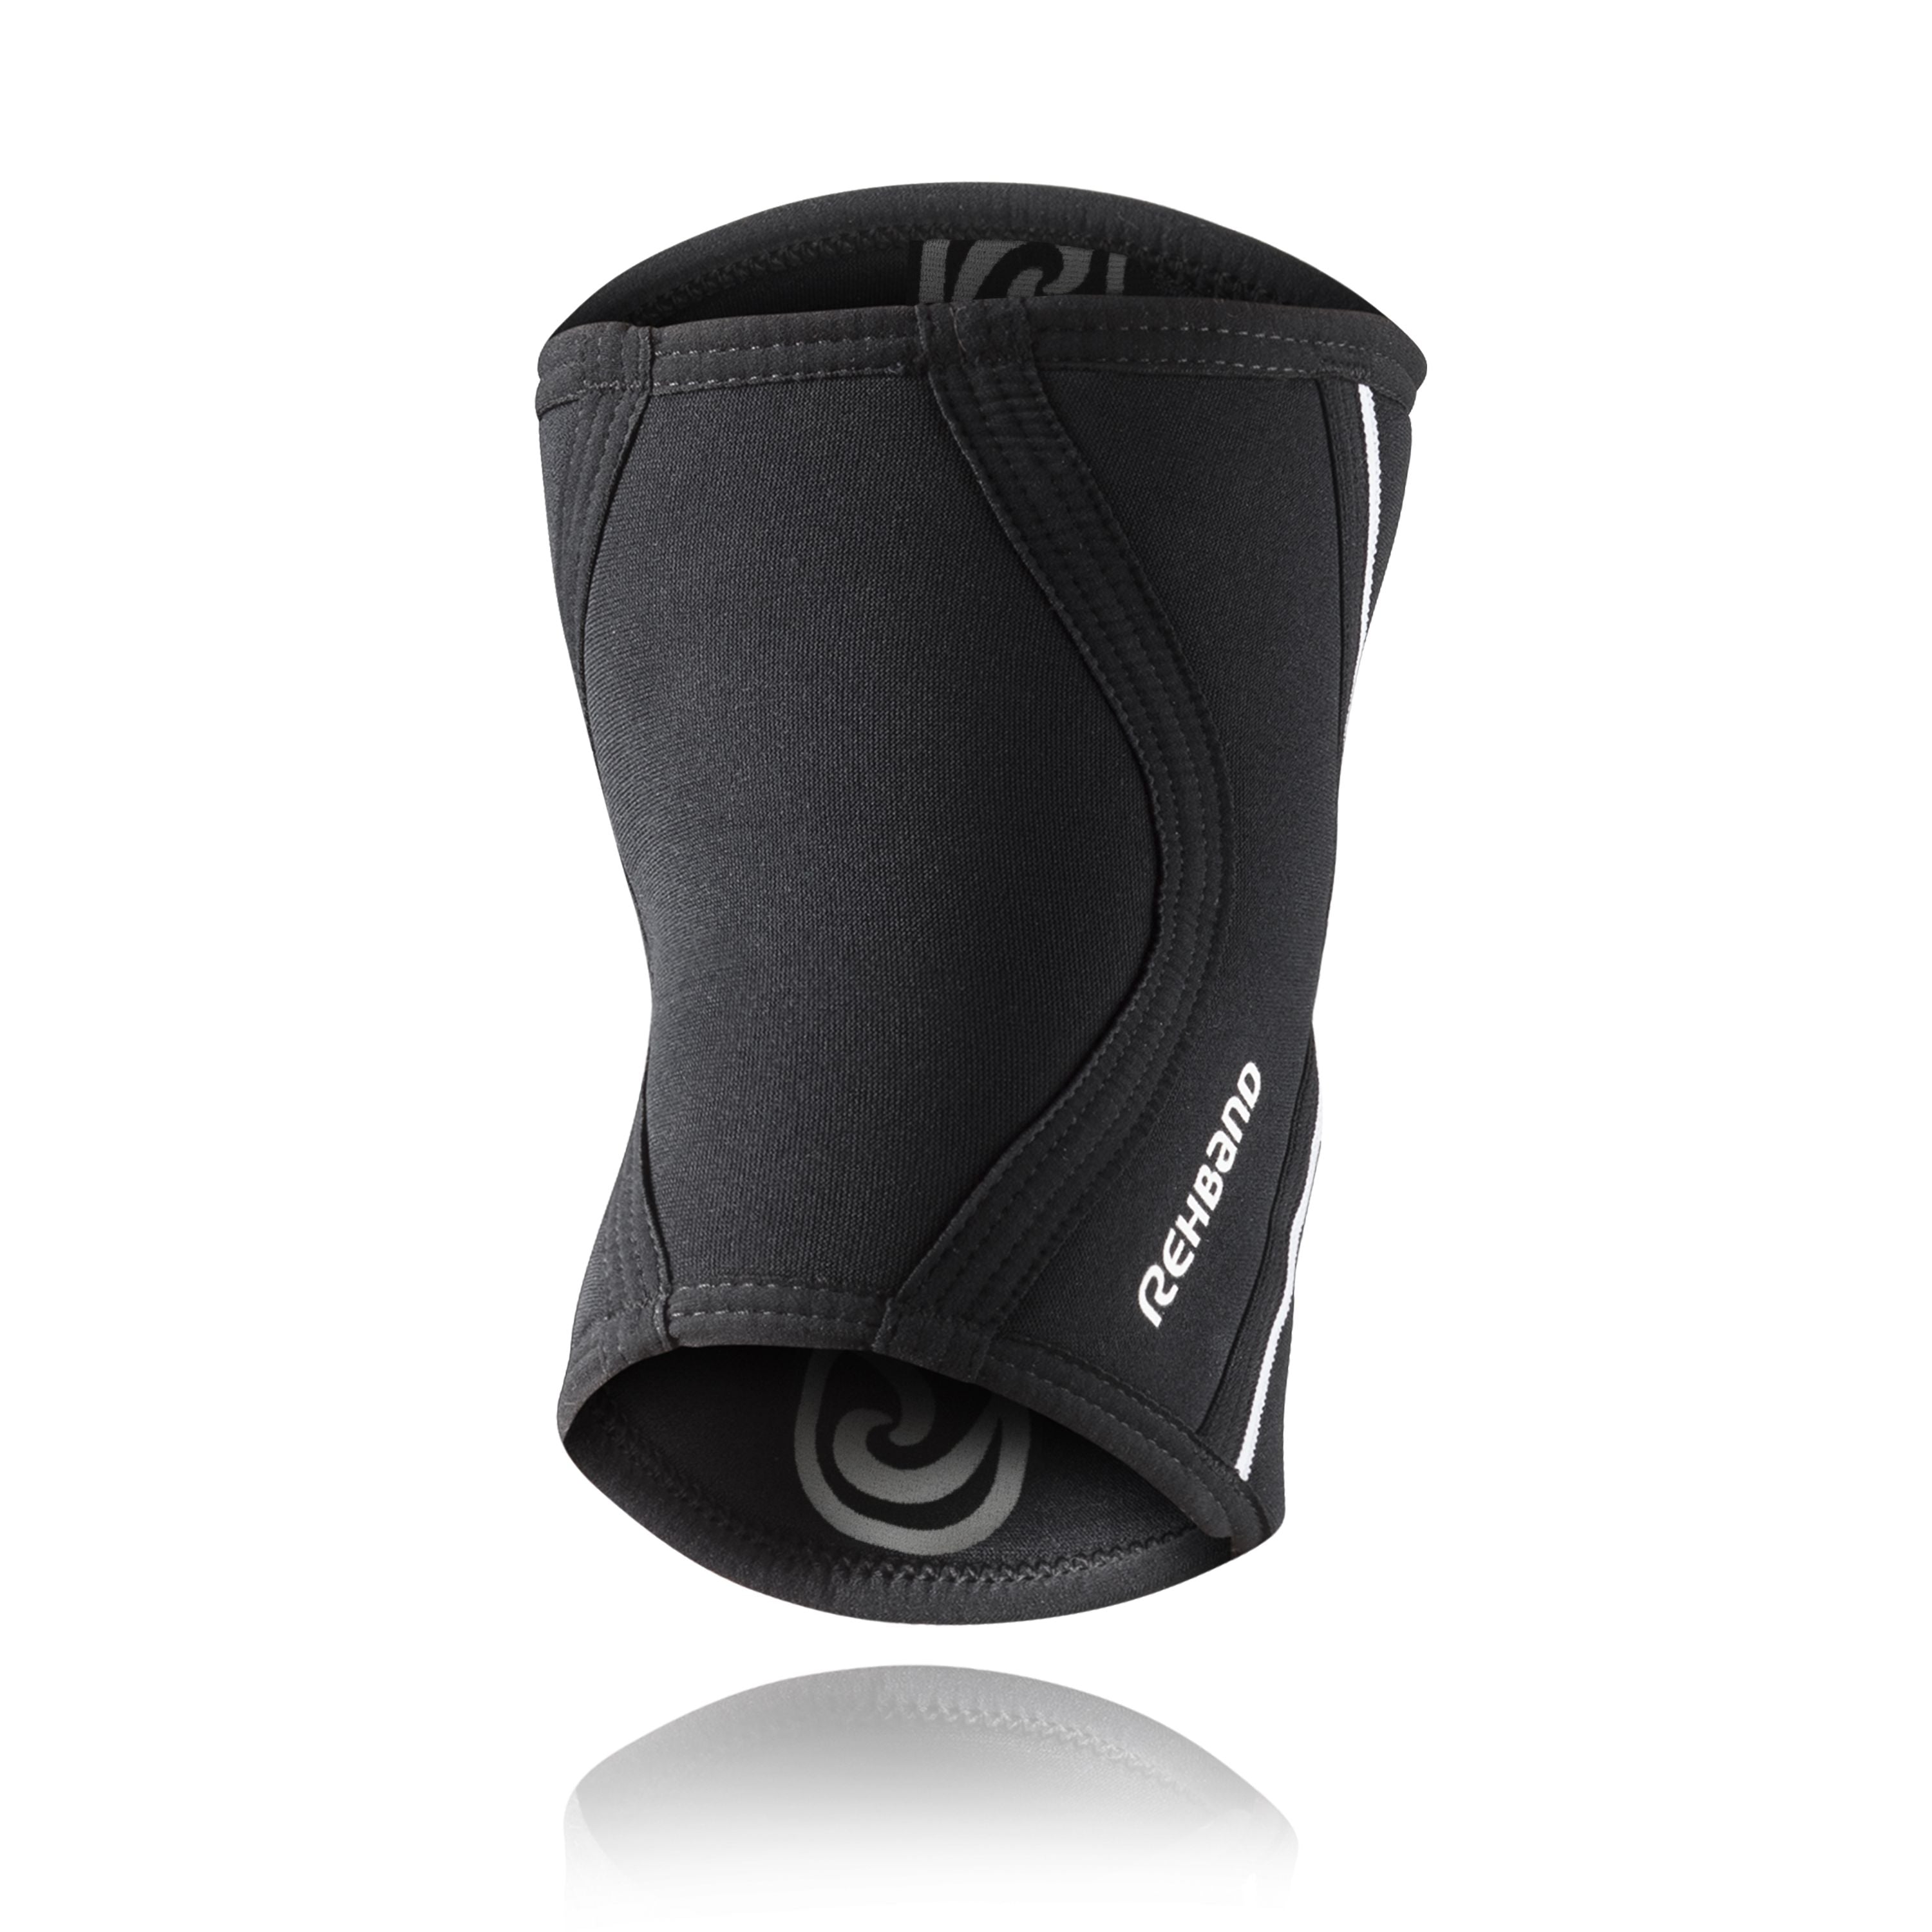 Rx Elbow Sleeve 5mm - Black (Single) from Rehband for Genejack WOD